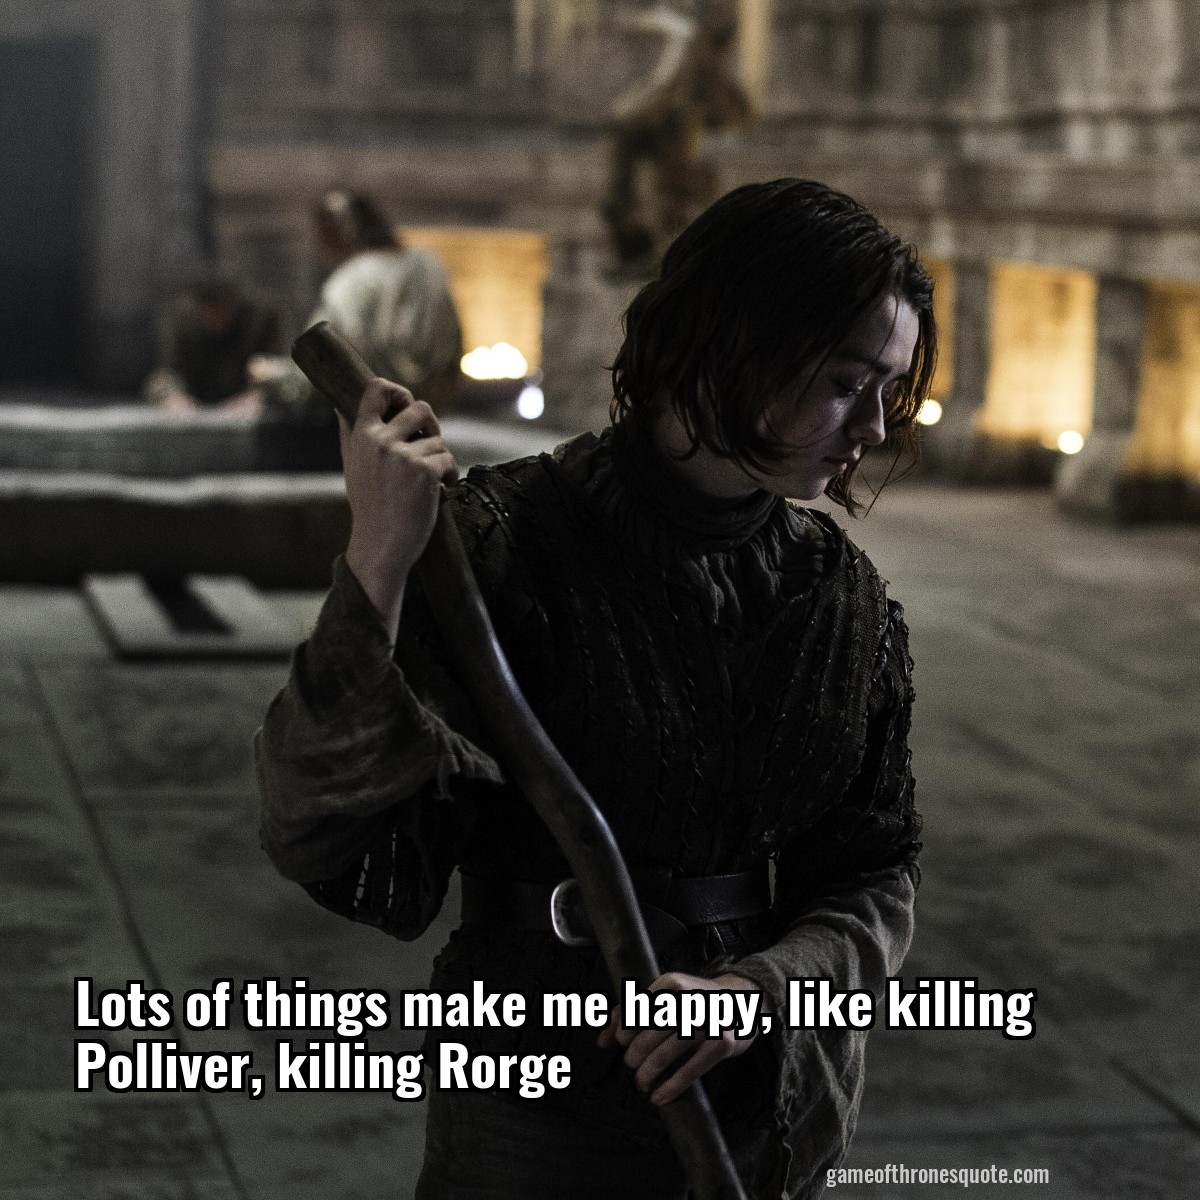 Lots of things make me happy, like killing Polliver, killing Rorge